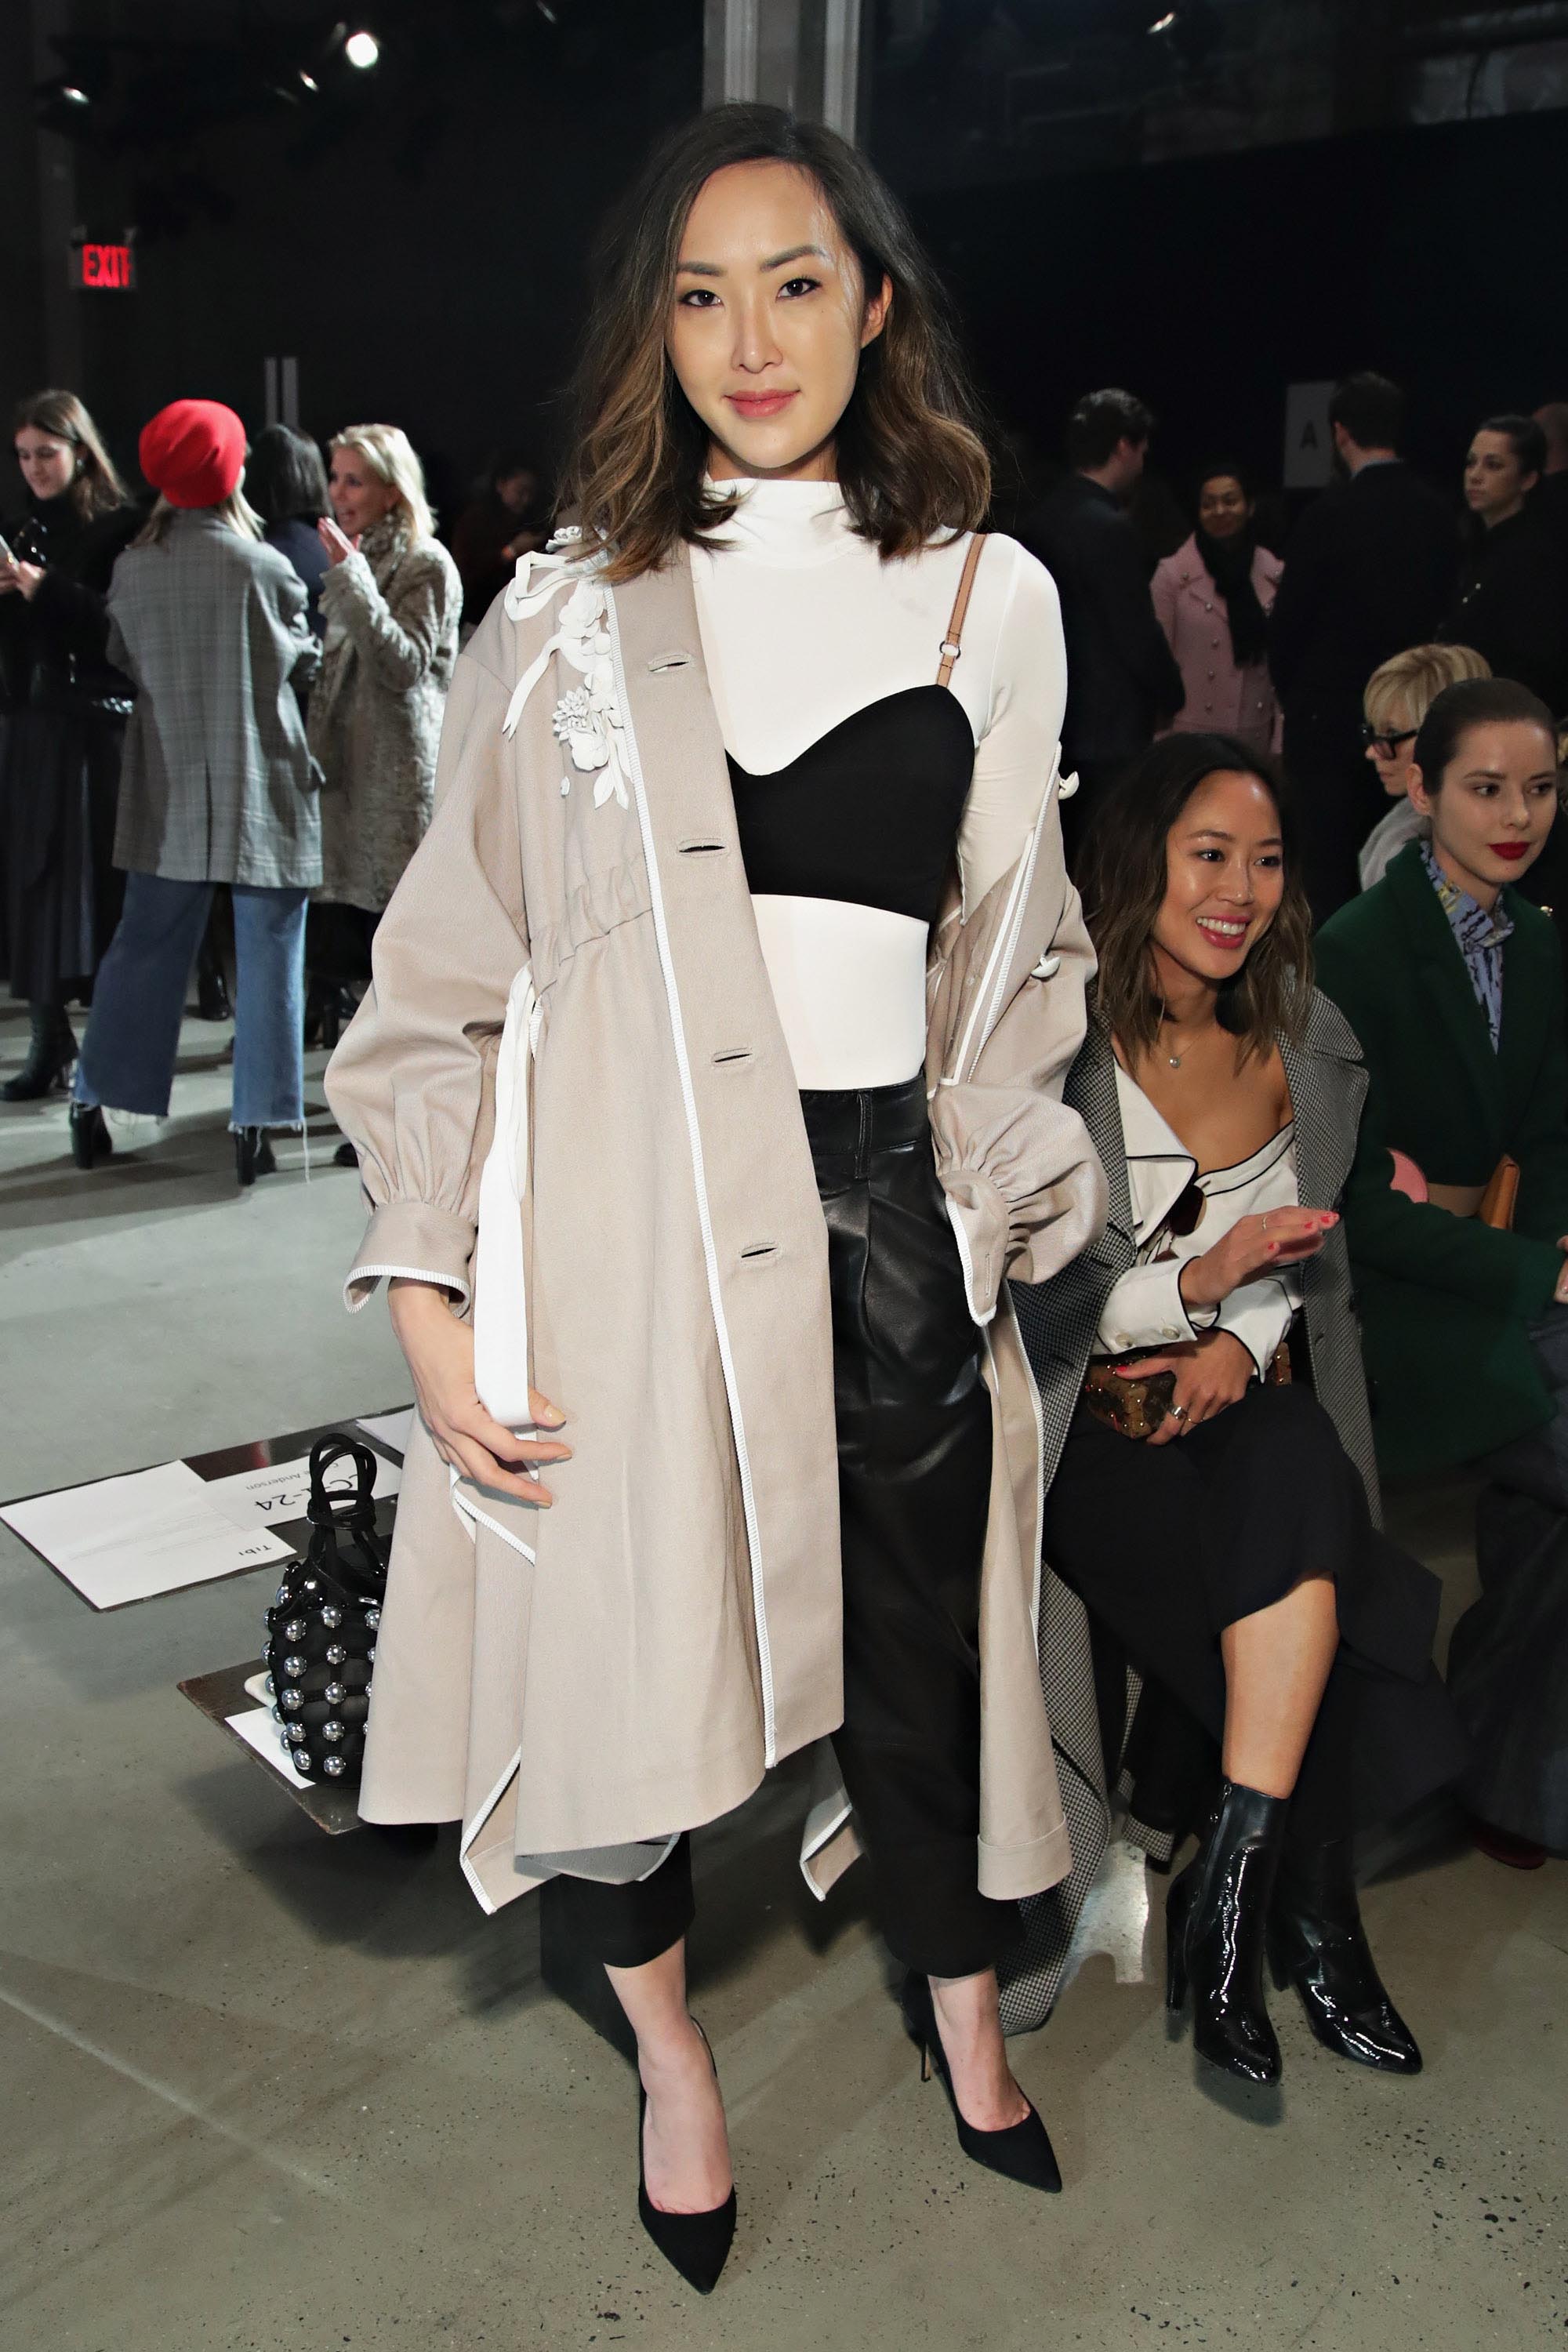 Chriselle Lim attends the Tibi fashion show